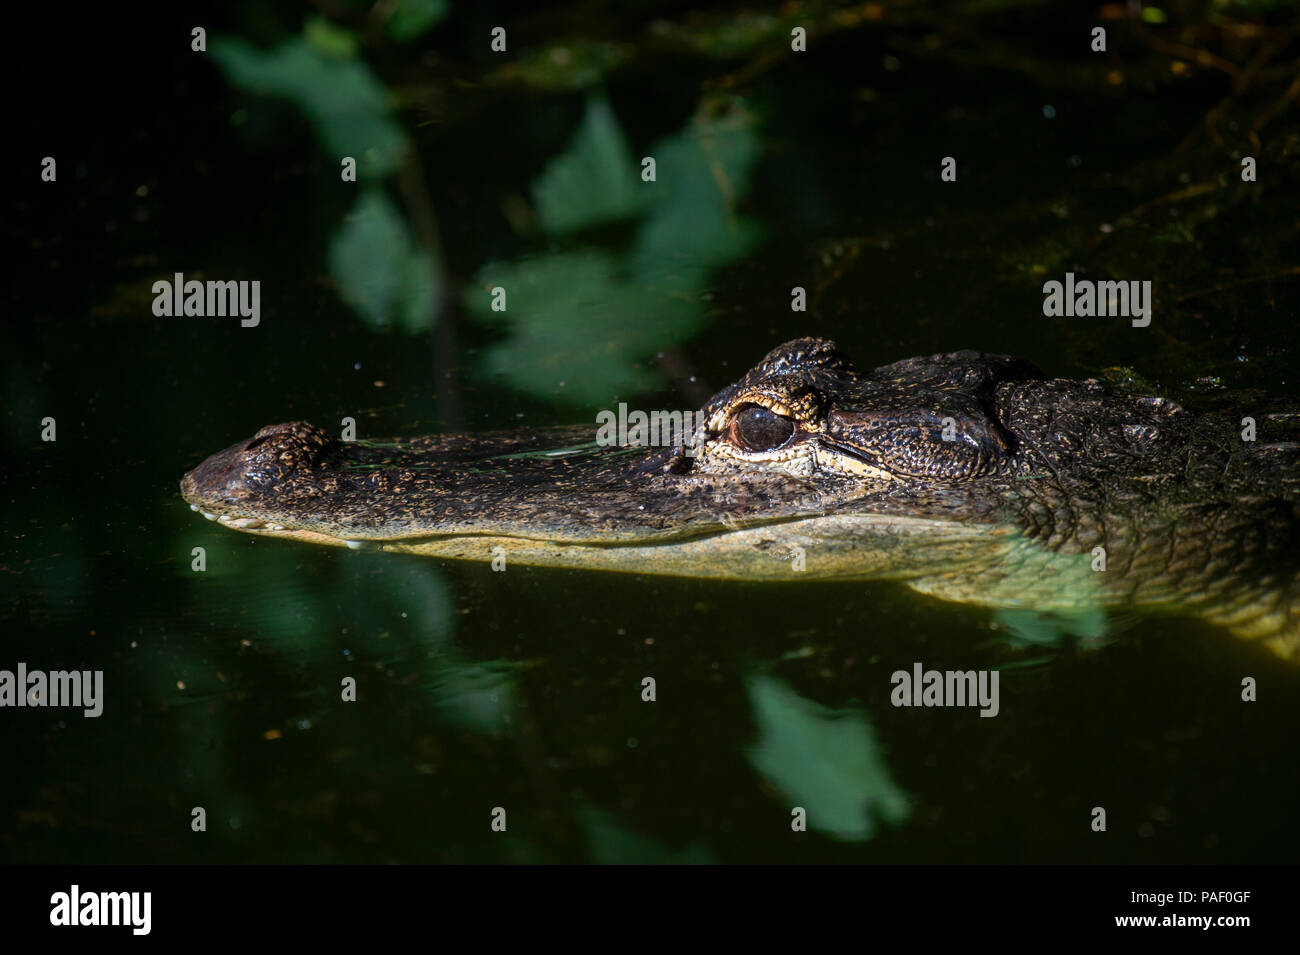 An adult crocodile lurking just above the water level with both eyes visible Stock Photo